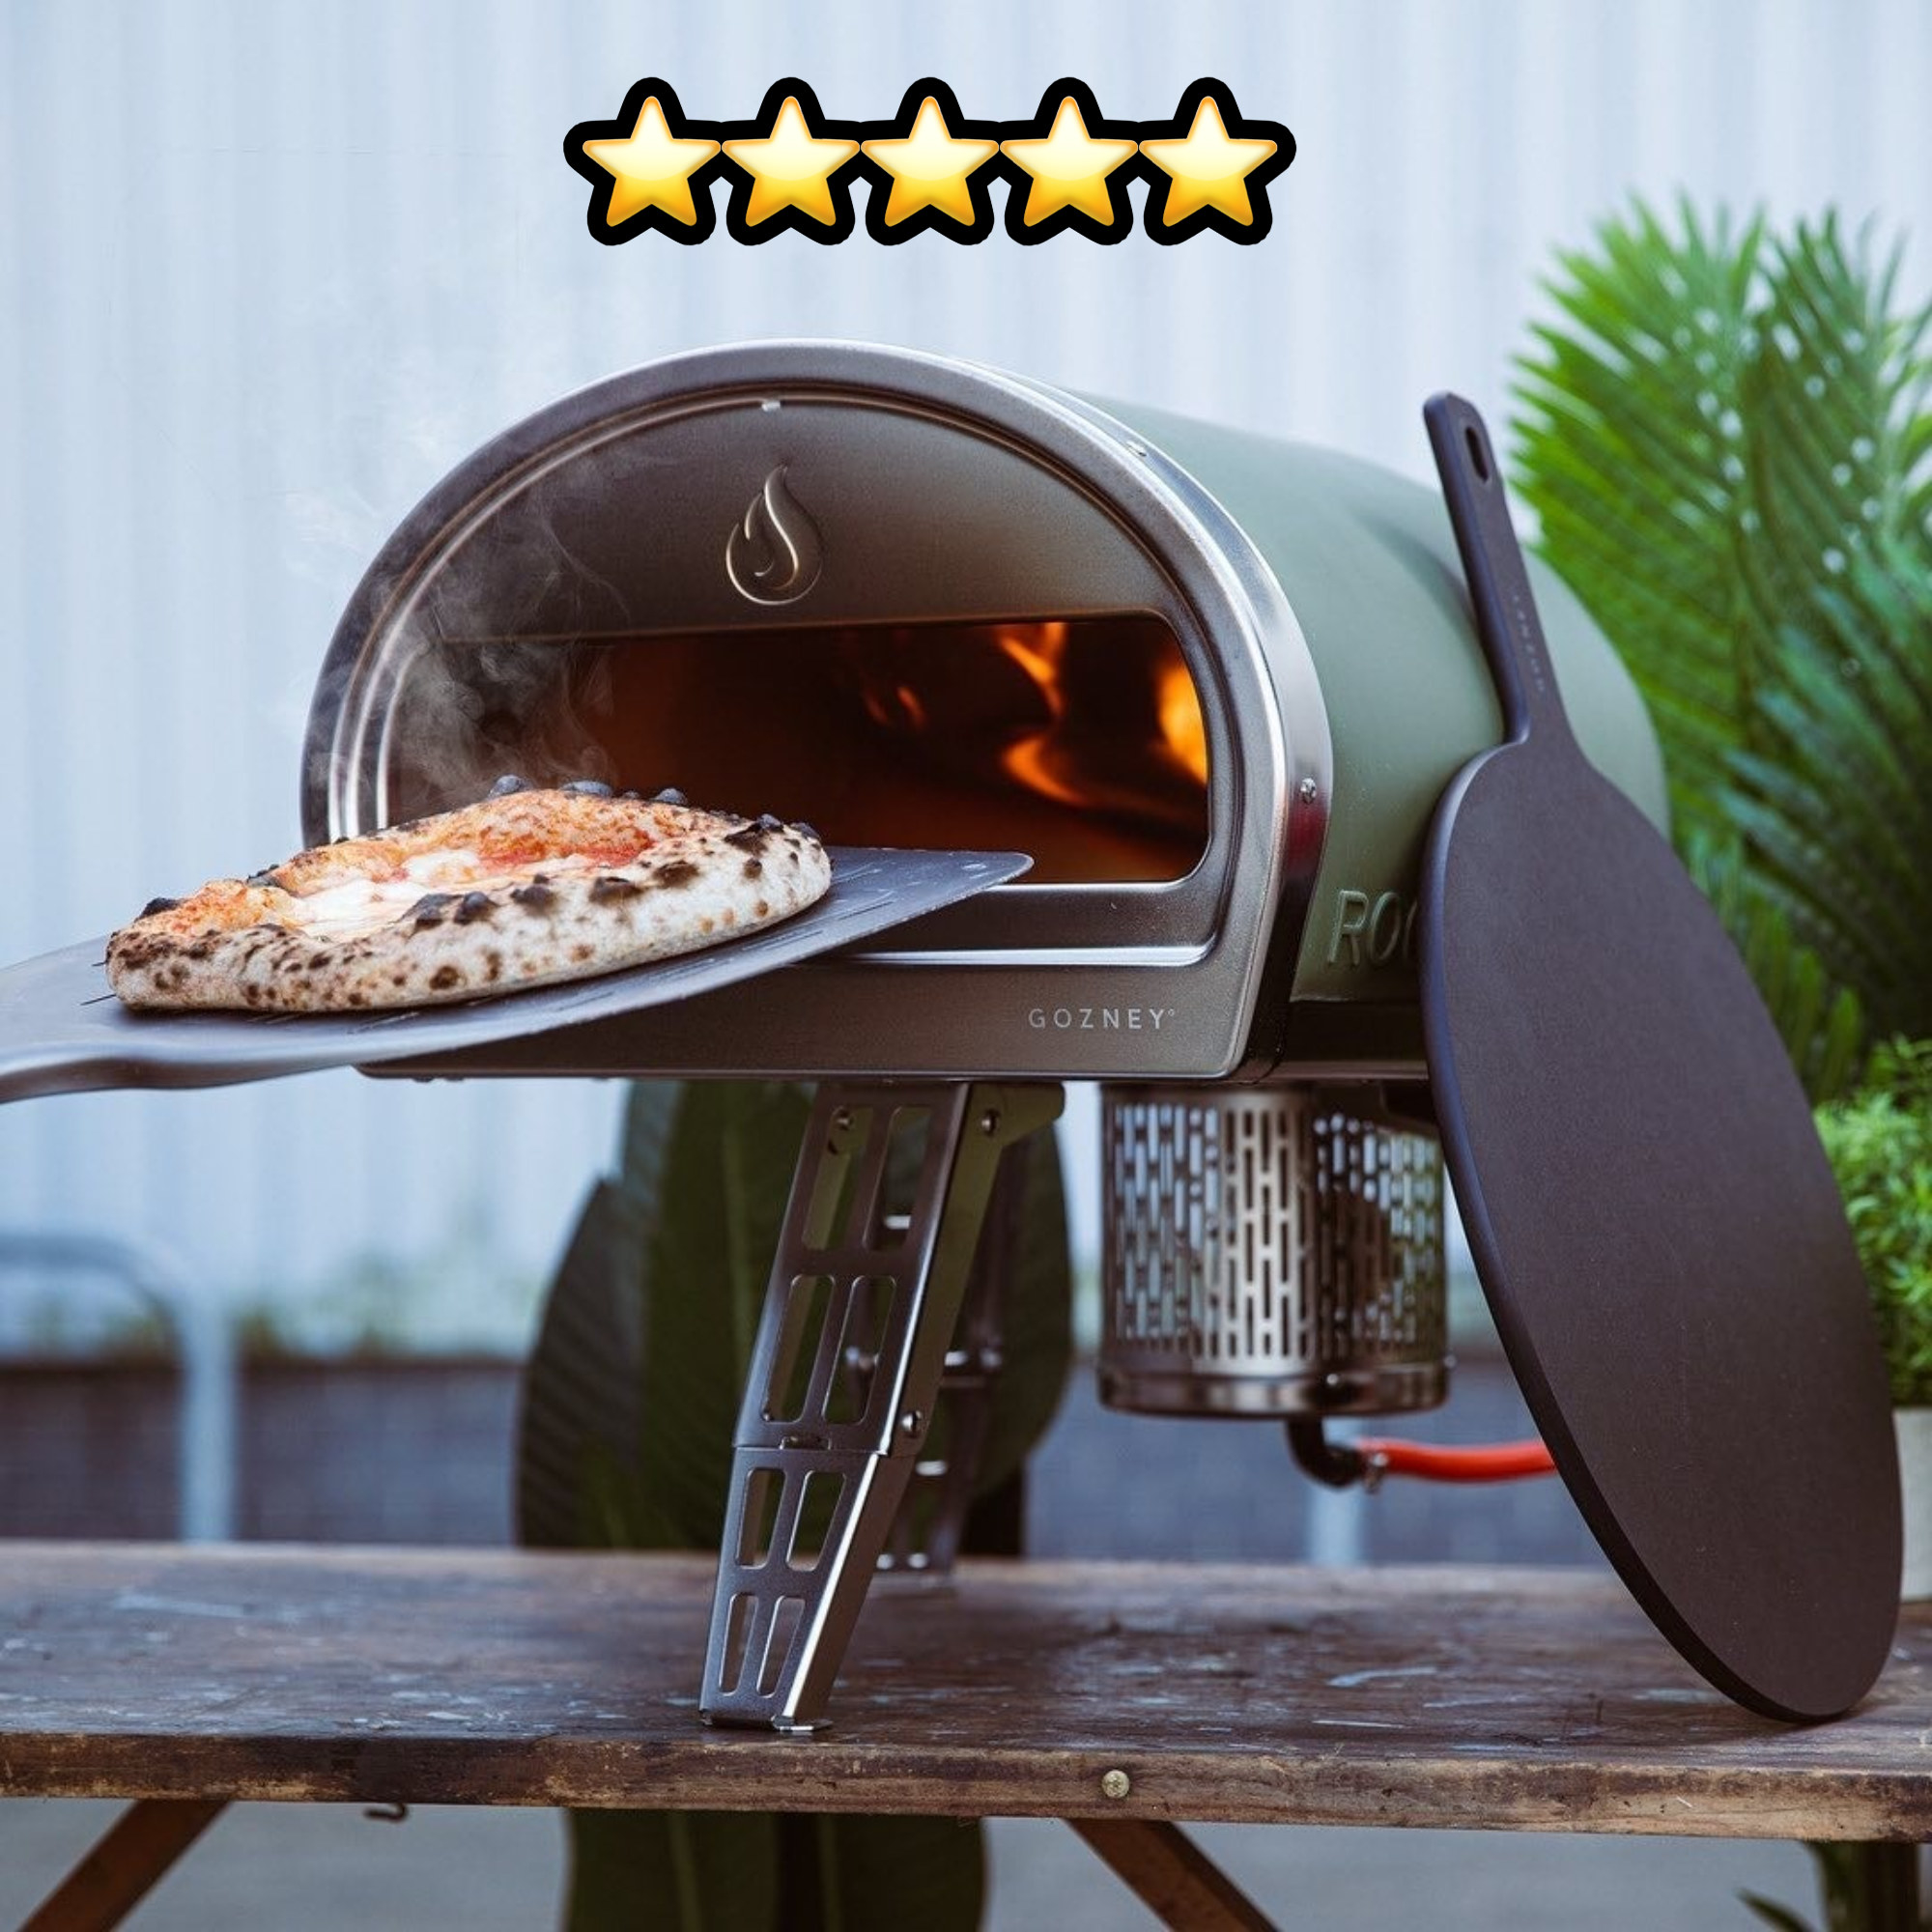 I Gave This At Home Pizza Oven A Whirl, And I Can't Believe I've Been Wasting My Money On Delivery For So Long